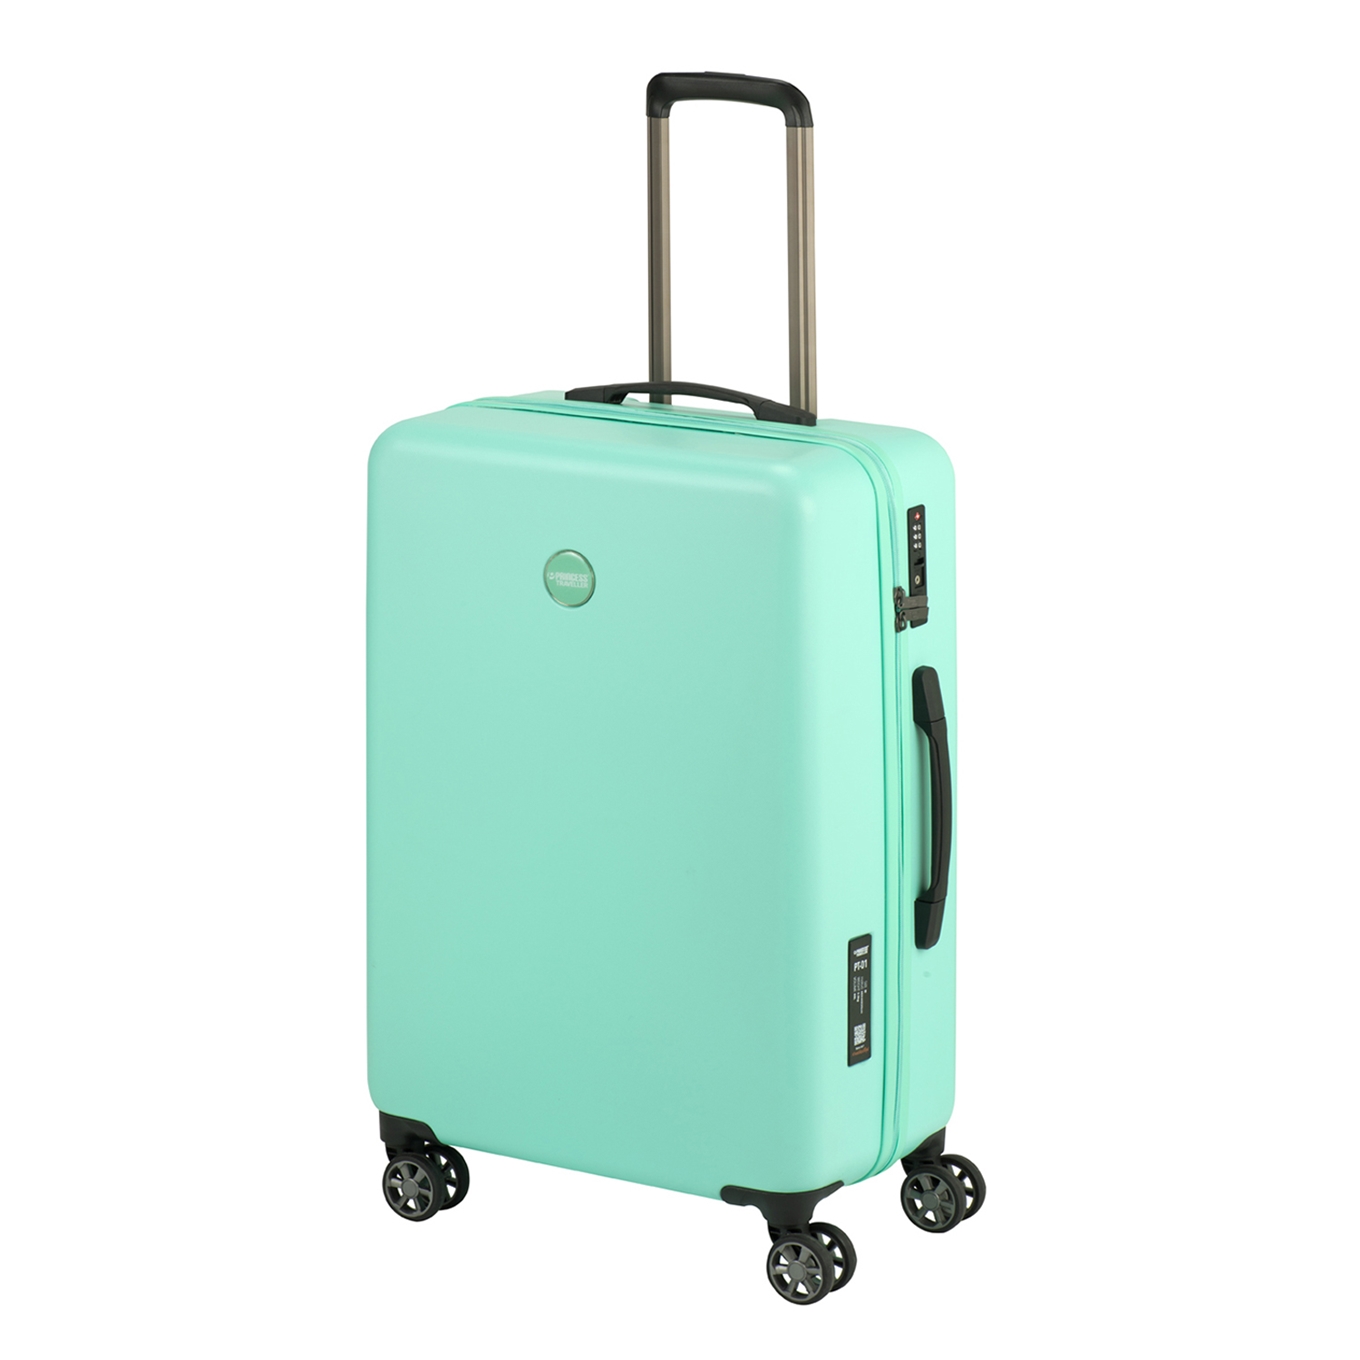 Princess Traveller PT-01 Deluxe Medium Trolley pacific mint Harde Koffer